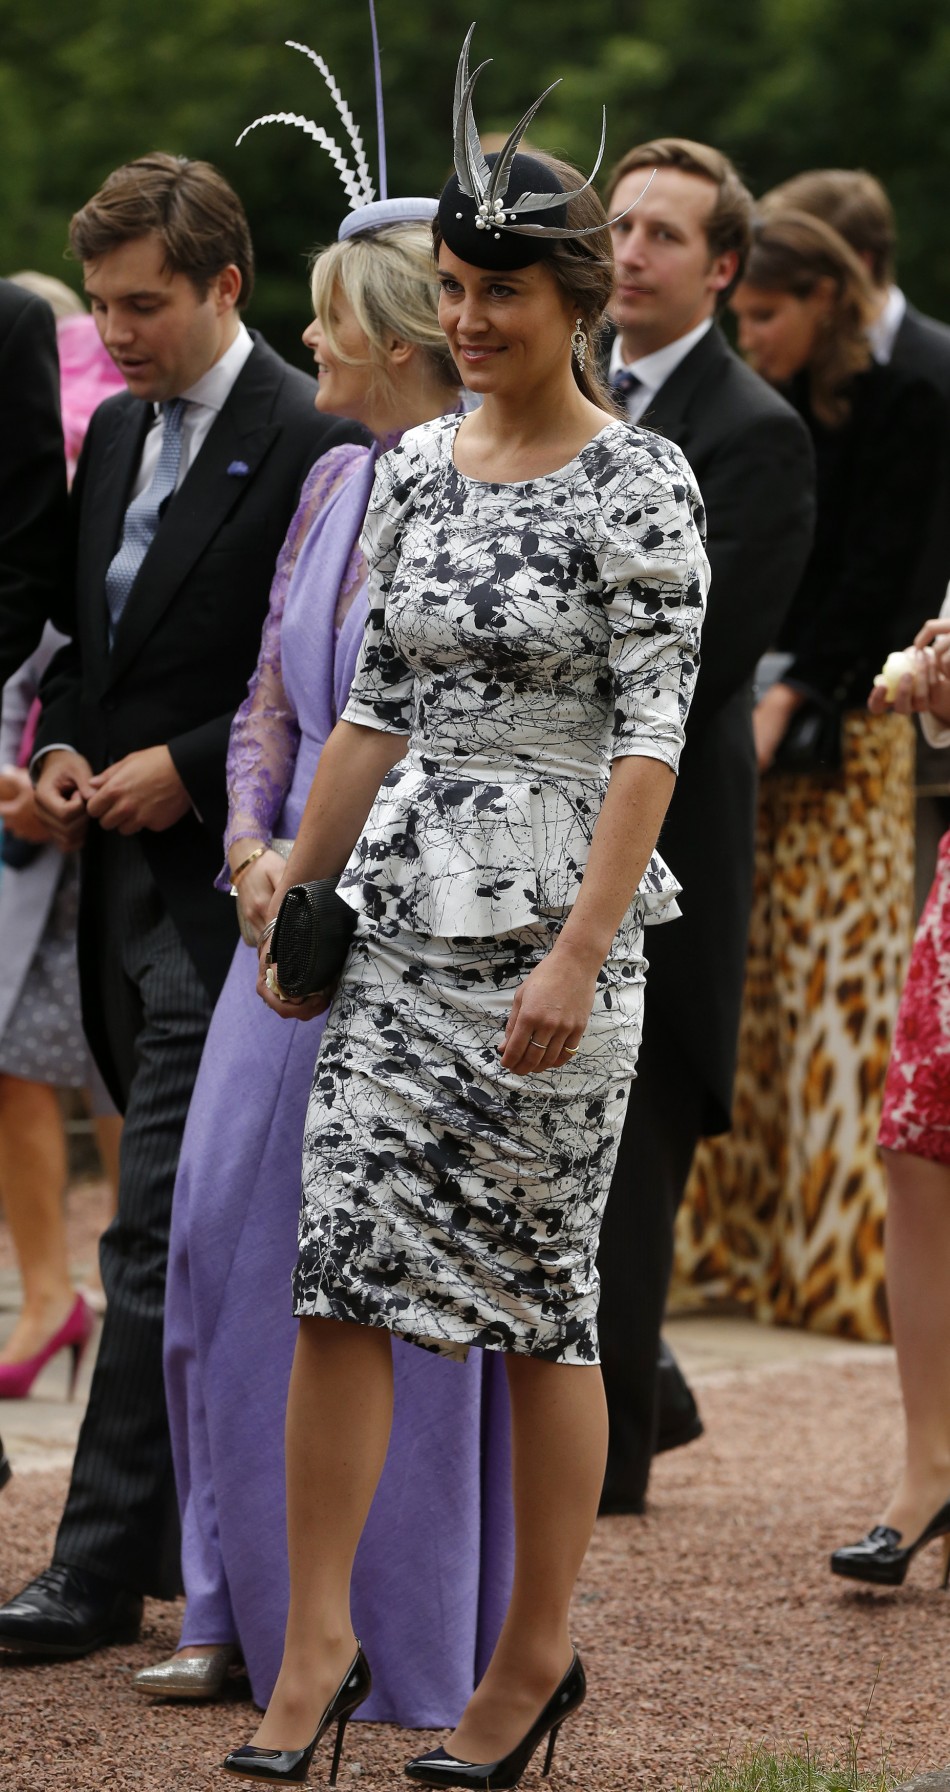 Pippa Middleton, the sister of Catherine, Duchess of Cambridge smiles as she leaves the wedding